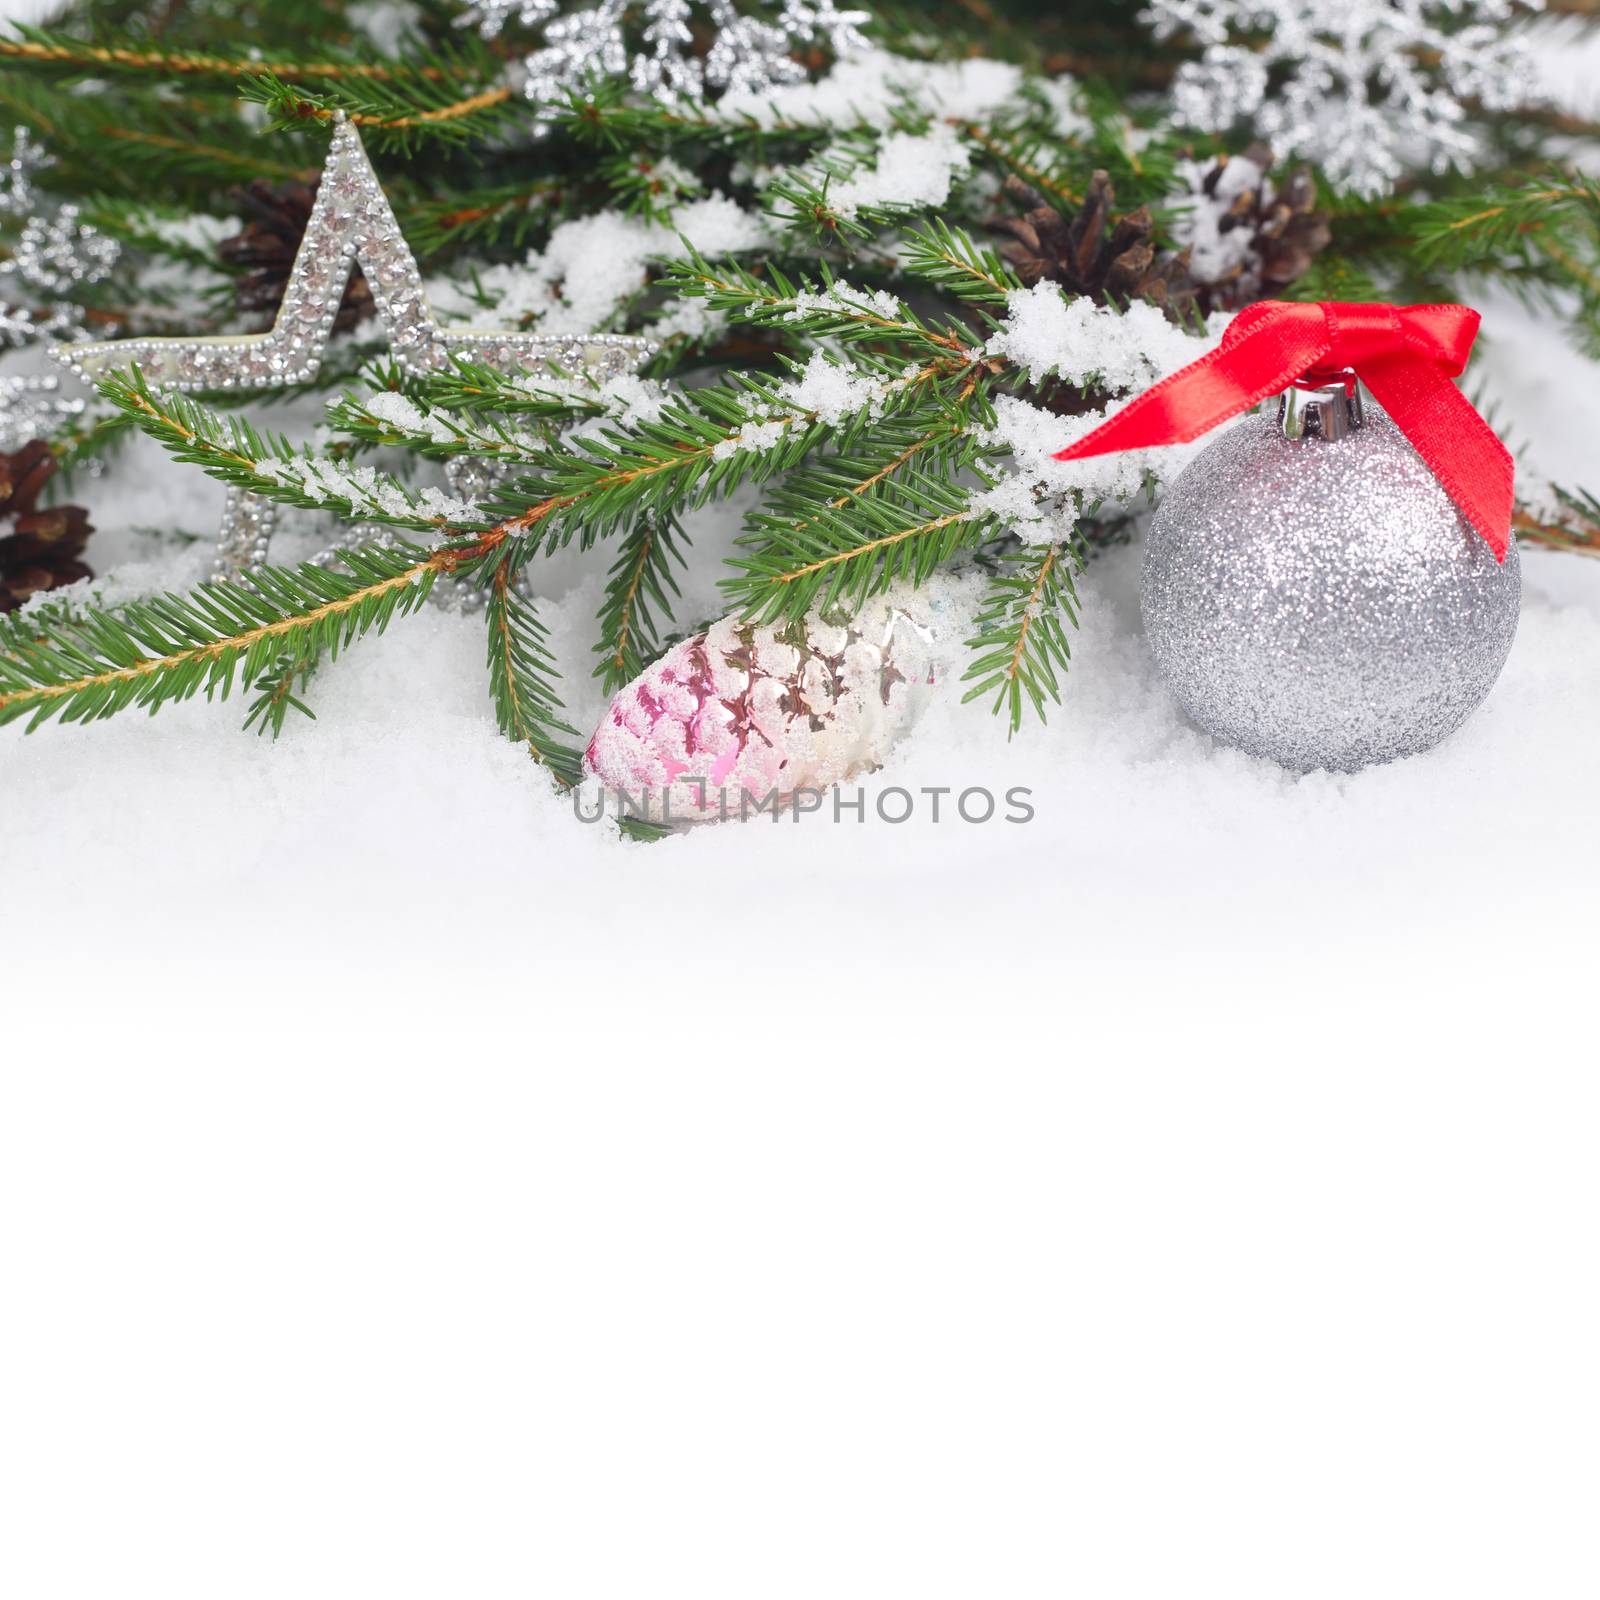 Christmas decorations and fir with pine cones on snow